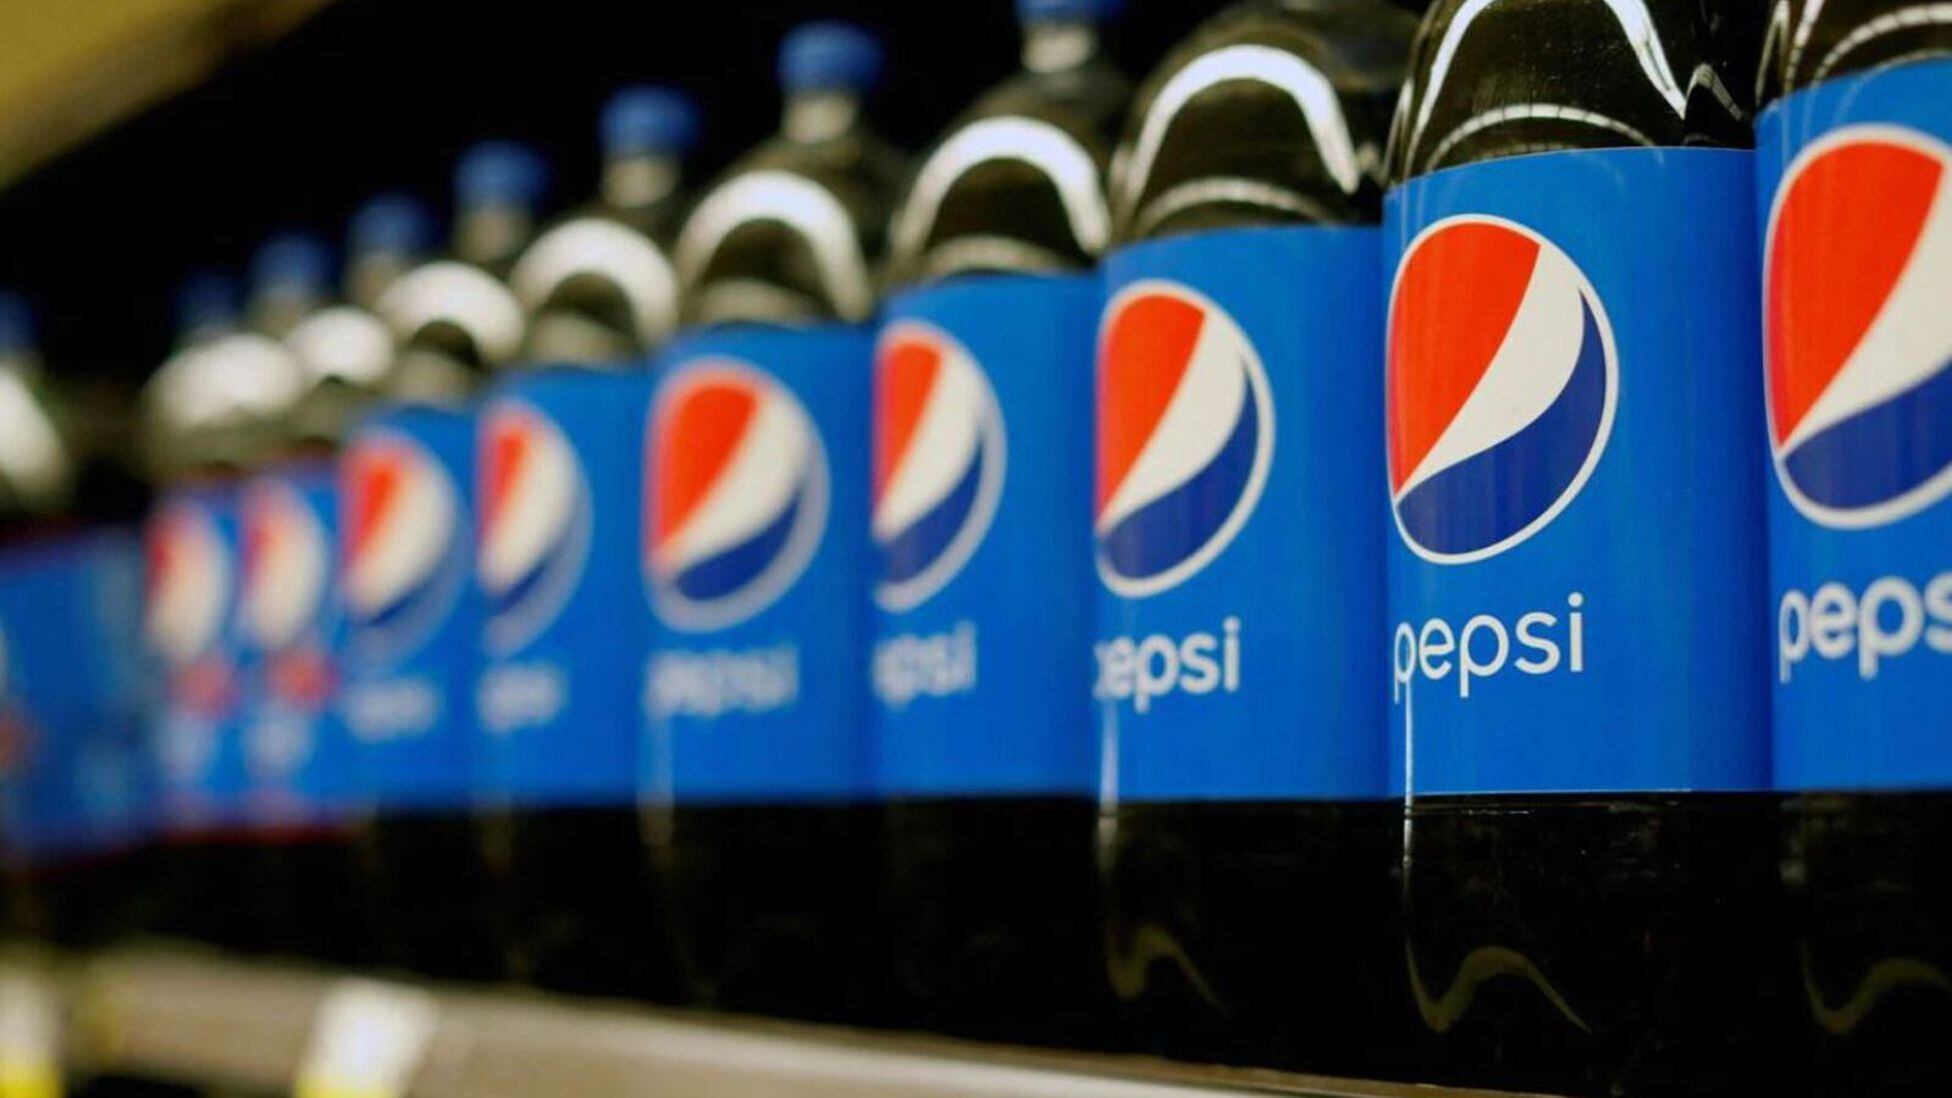 Pepsi warns that prices may continue to rise - AS USA